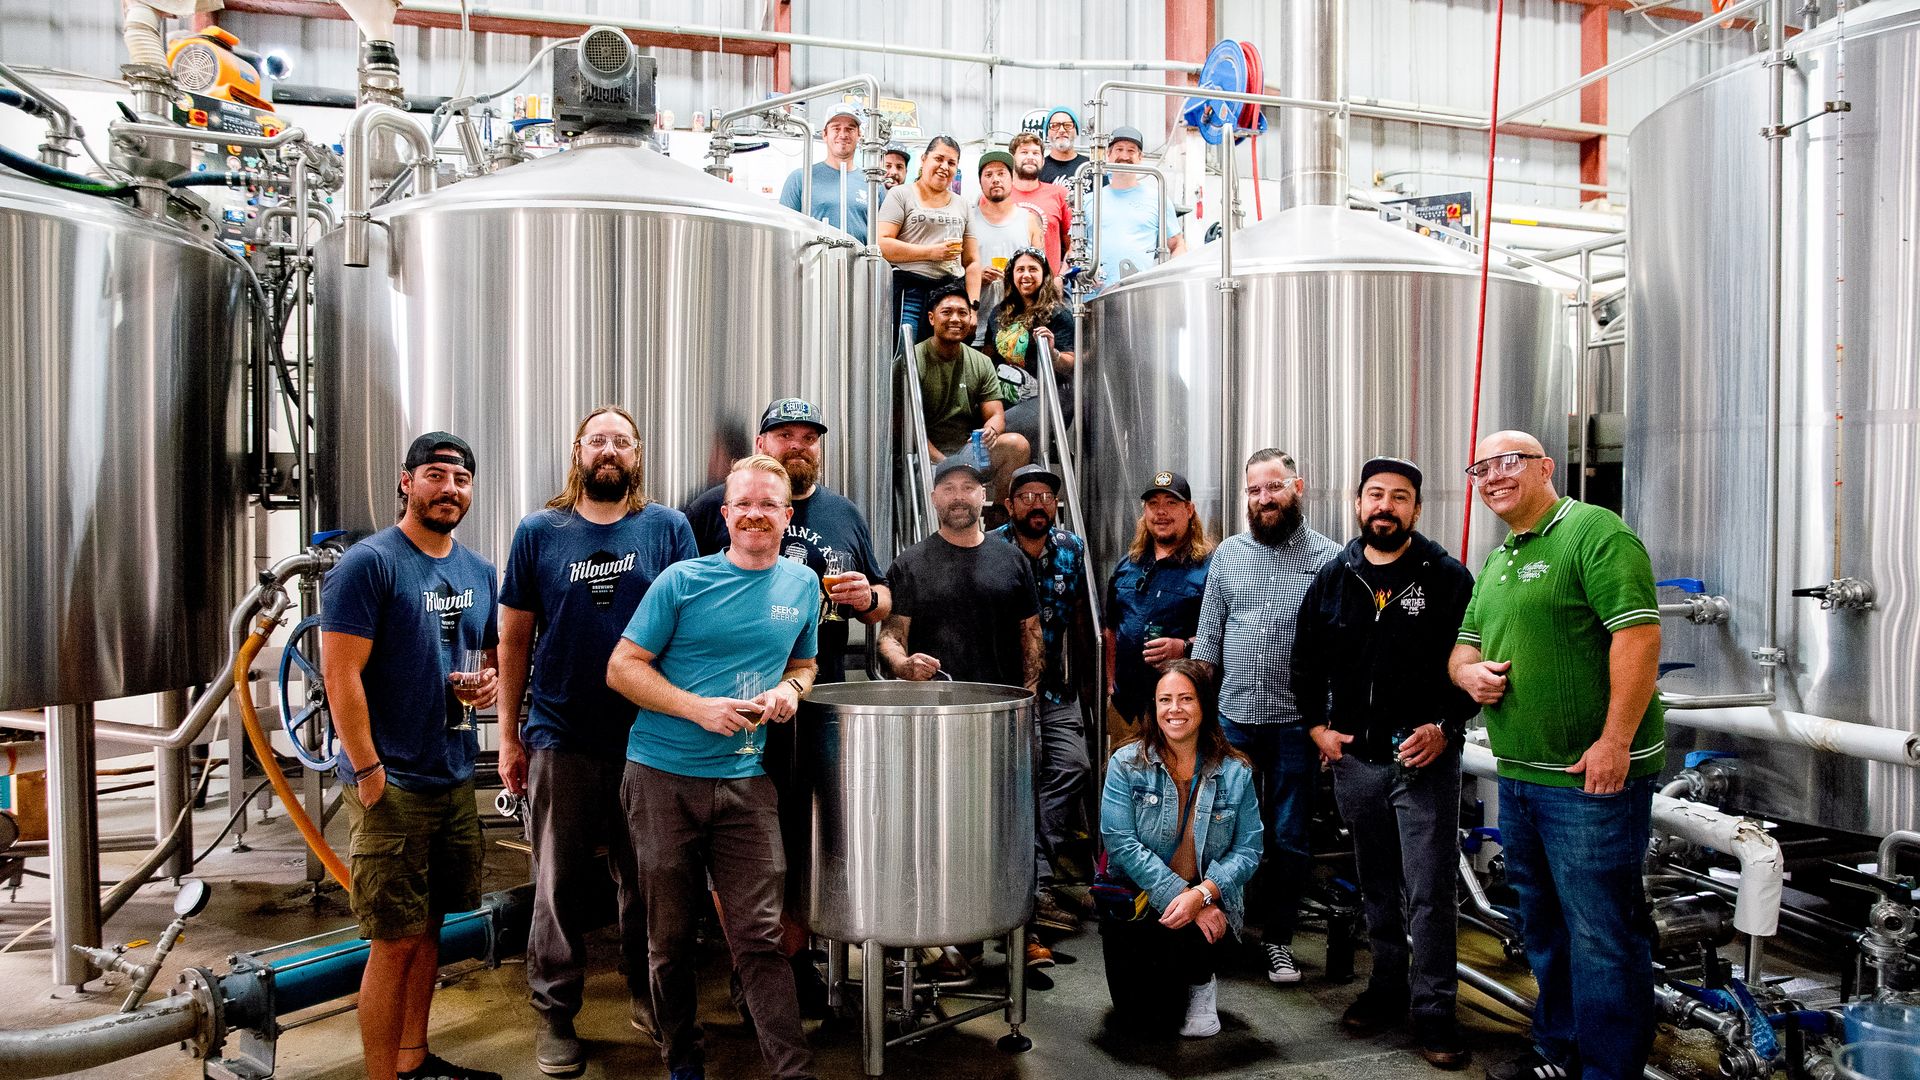 Brewers gather to brew the "Capital of Craft" IPA for San Diego Beer Week